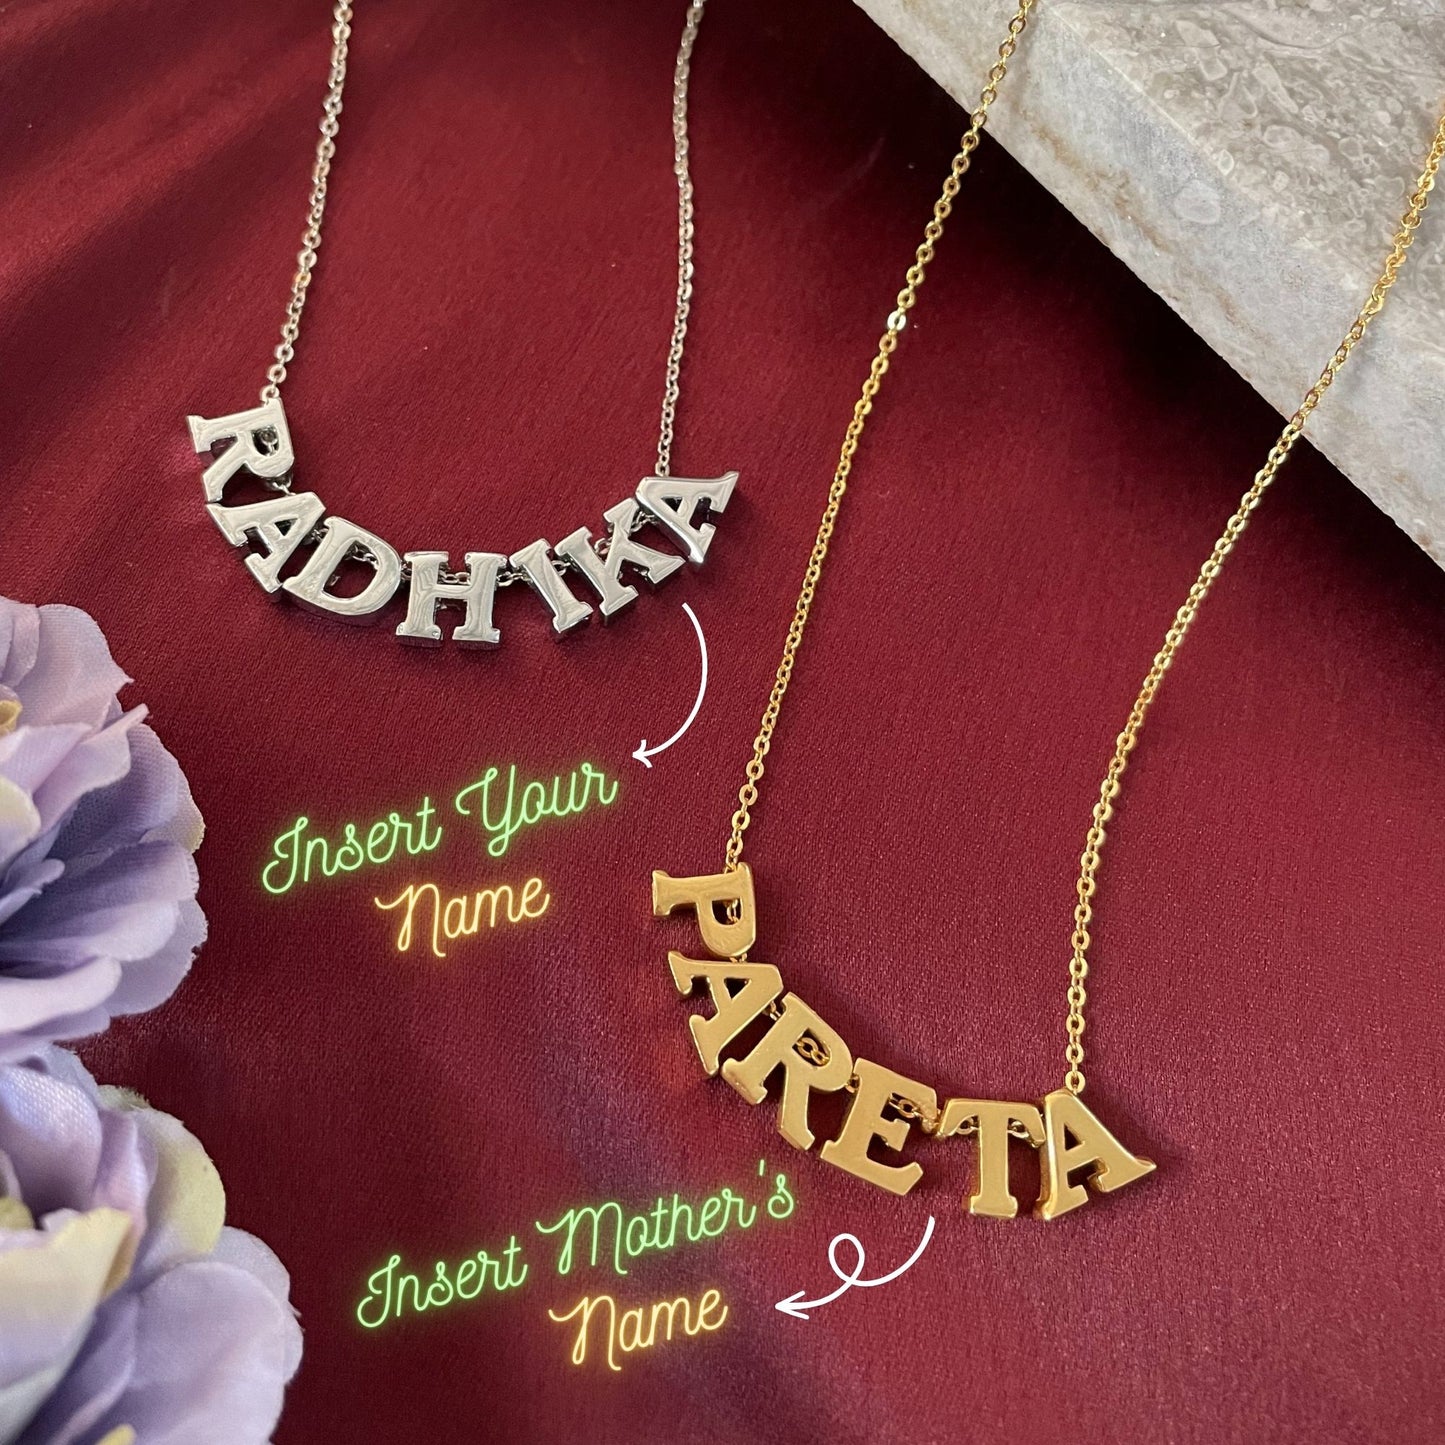 Matching Name Necklaces For Mother and Child (Son/Daughter)